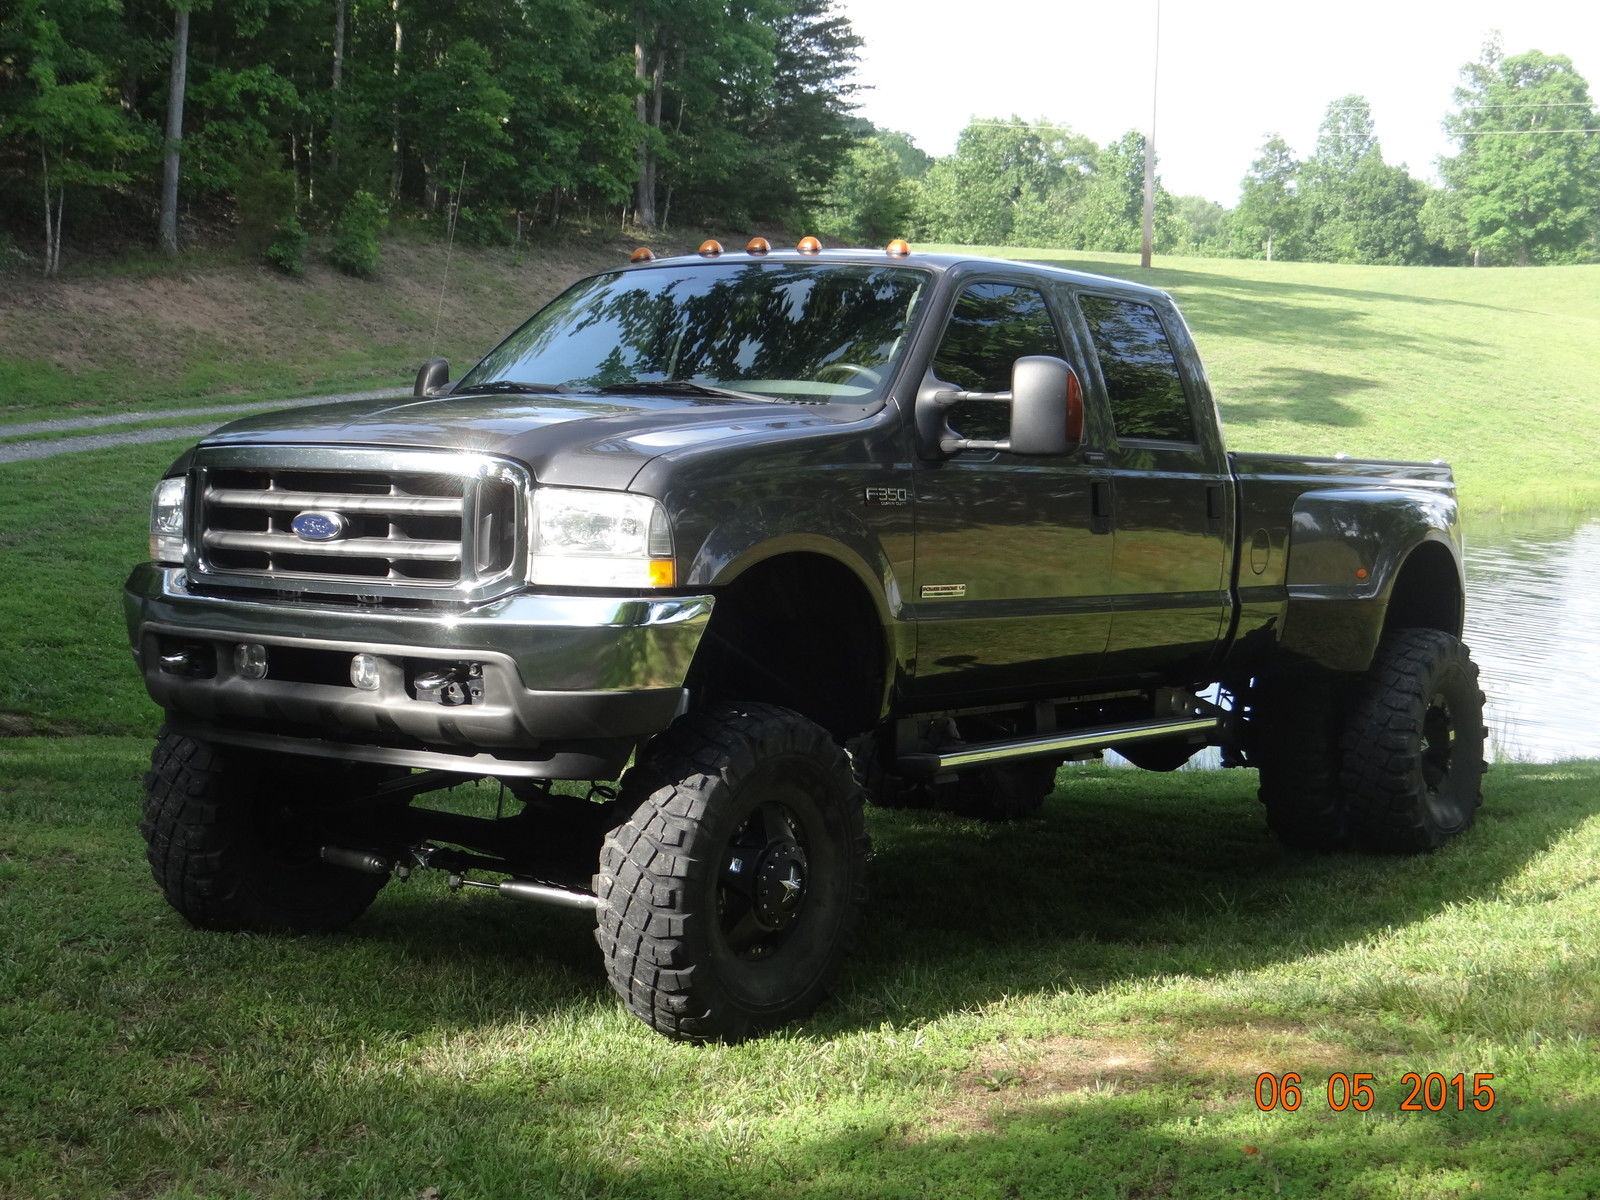 2004 Ford F350 Monster Truck for sale